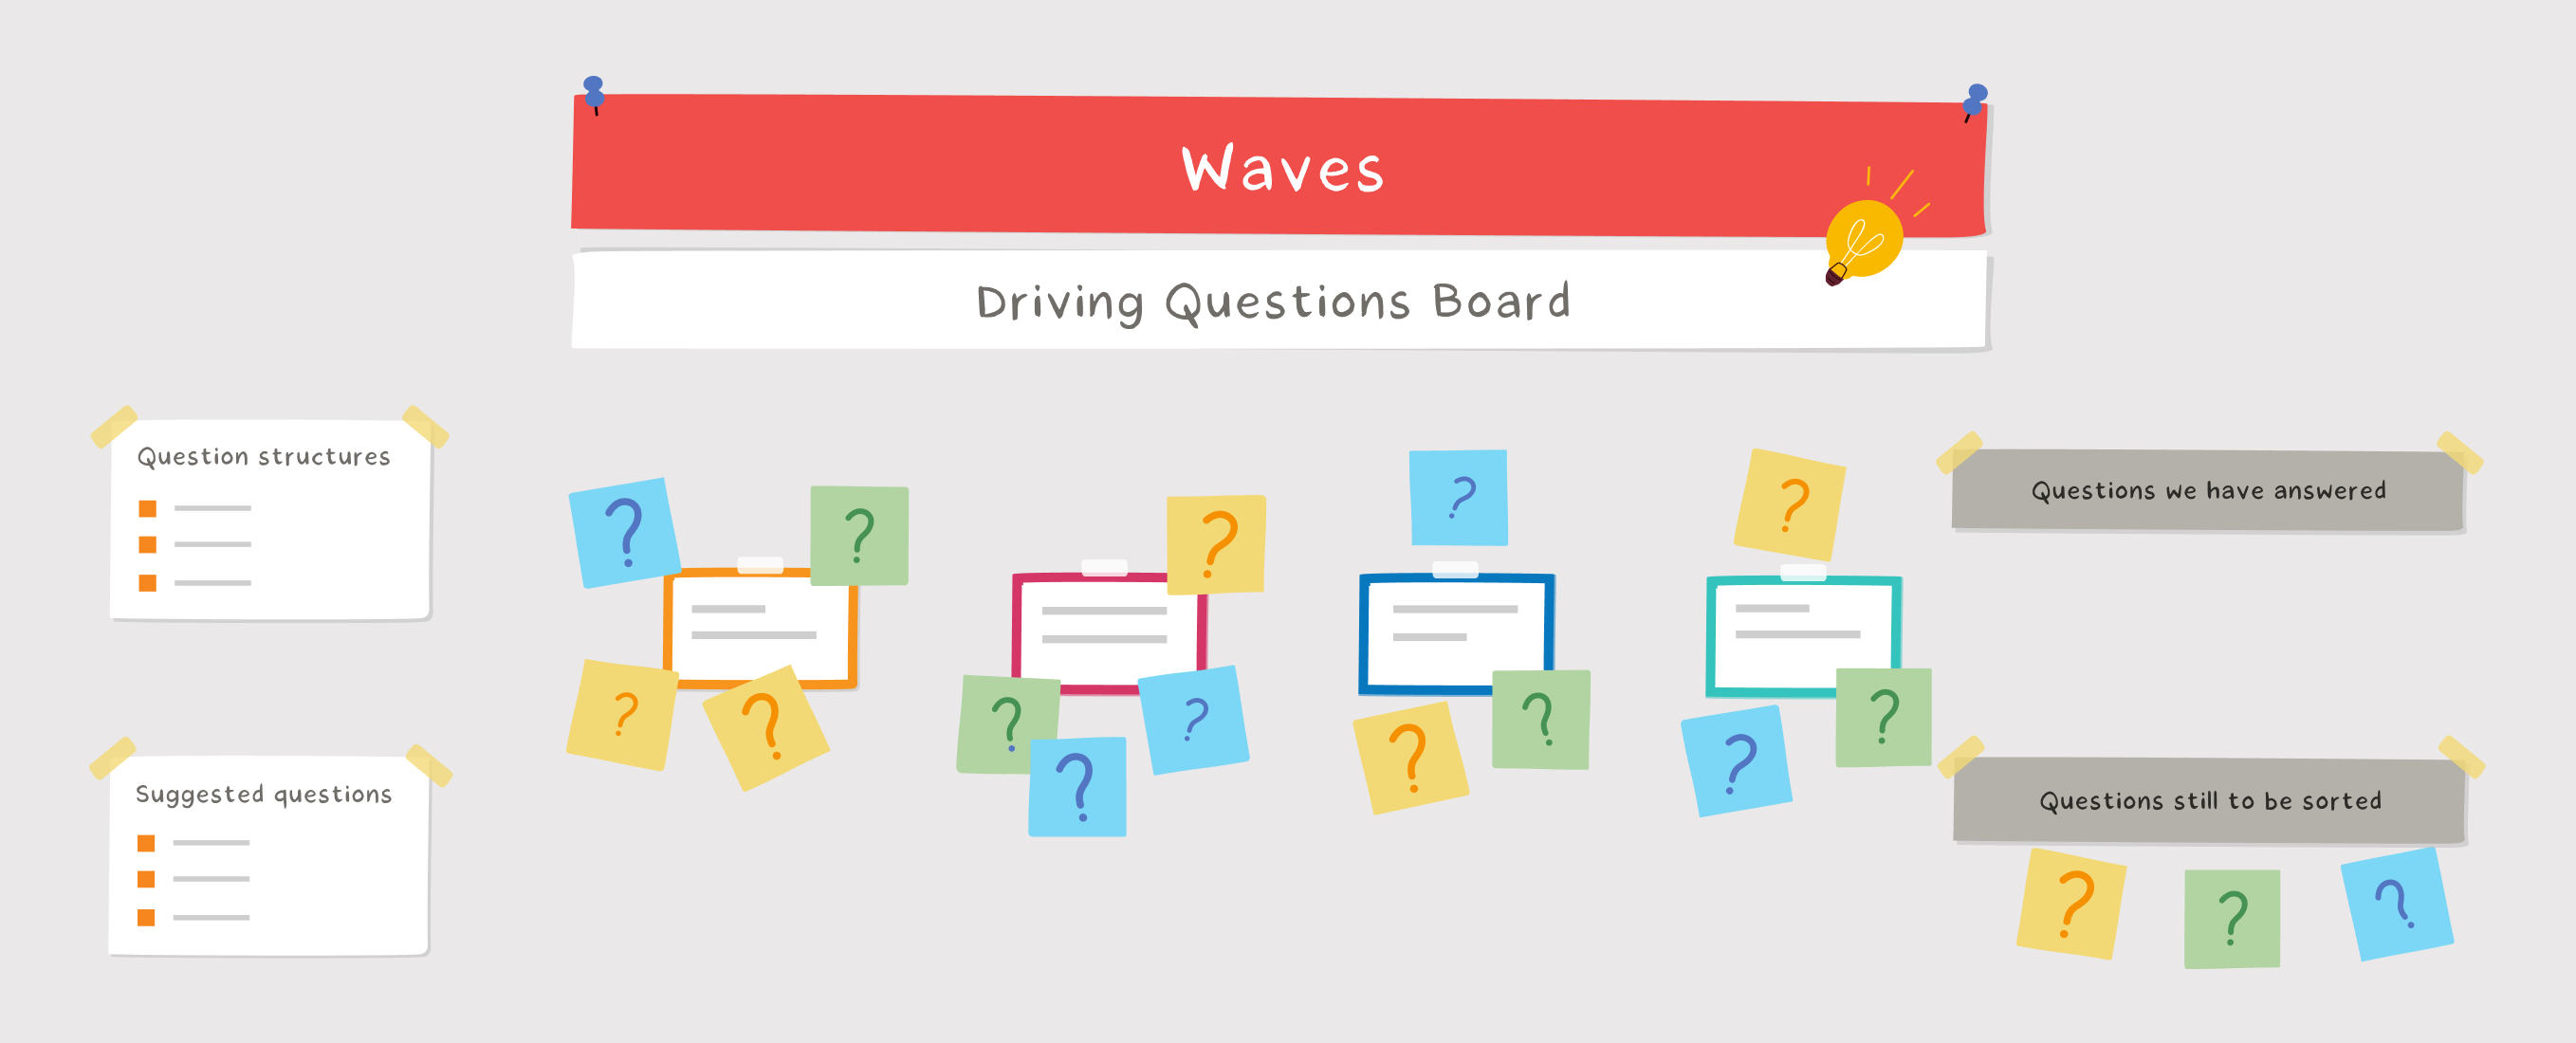 Driving Questions Boards in Stile